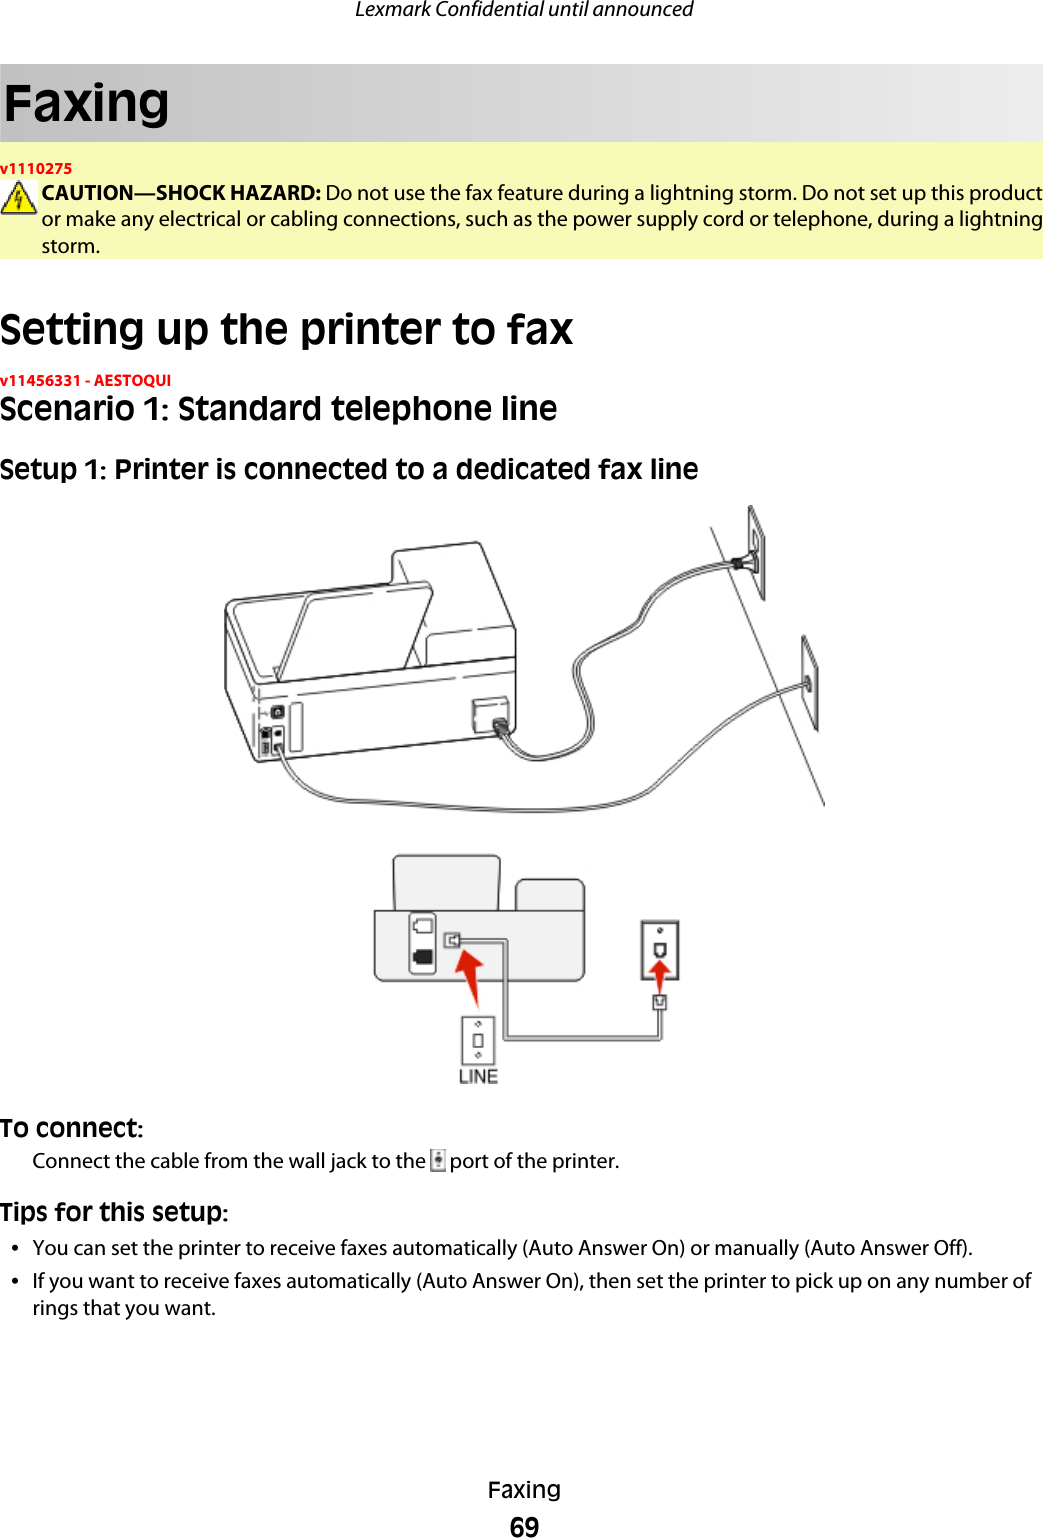 Faxingv1110275CAUTION—SHOCK HAZARD: Do not use the fax feature during a lightning storm. Do not set up this productor make any electrical or cabling connections, such as the power supply cord or telephone, during a lightningstorm.Setting up the printer to faxv11456331 - AESTOQUIScenario 1: Standard telephone lineSetup 1: Printer is connected to a dedicated fax lineTo connect:Connect the cable from the wall jack to the   port of the printer.Tips for this setup:•You can set the printer to receive faxes automatically (Auto Answer On) or manually (Auto Answer Off).•If you want to receive faxes automatically (Auto Answer On), then set the printer to pick up on any number ofrings that you want.Lexmark Confidential until announcedFaxing69